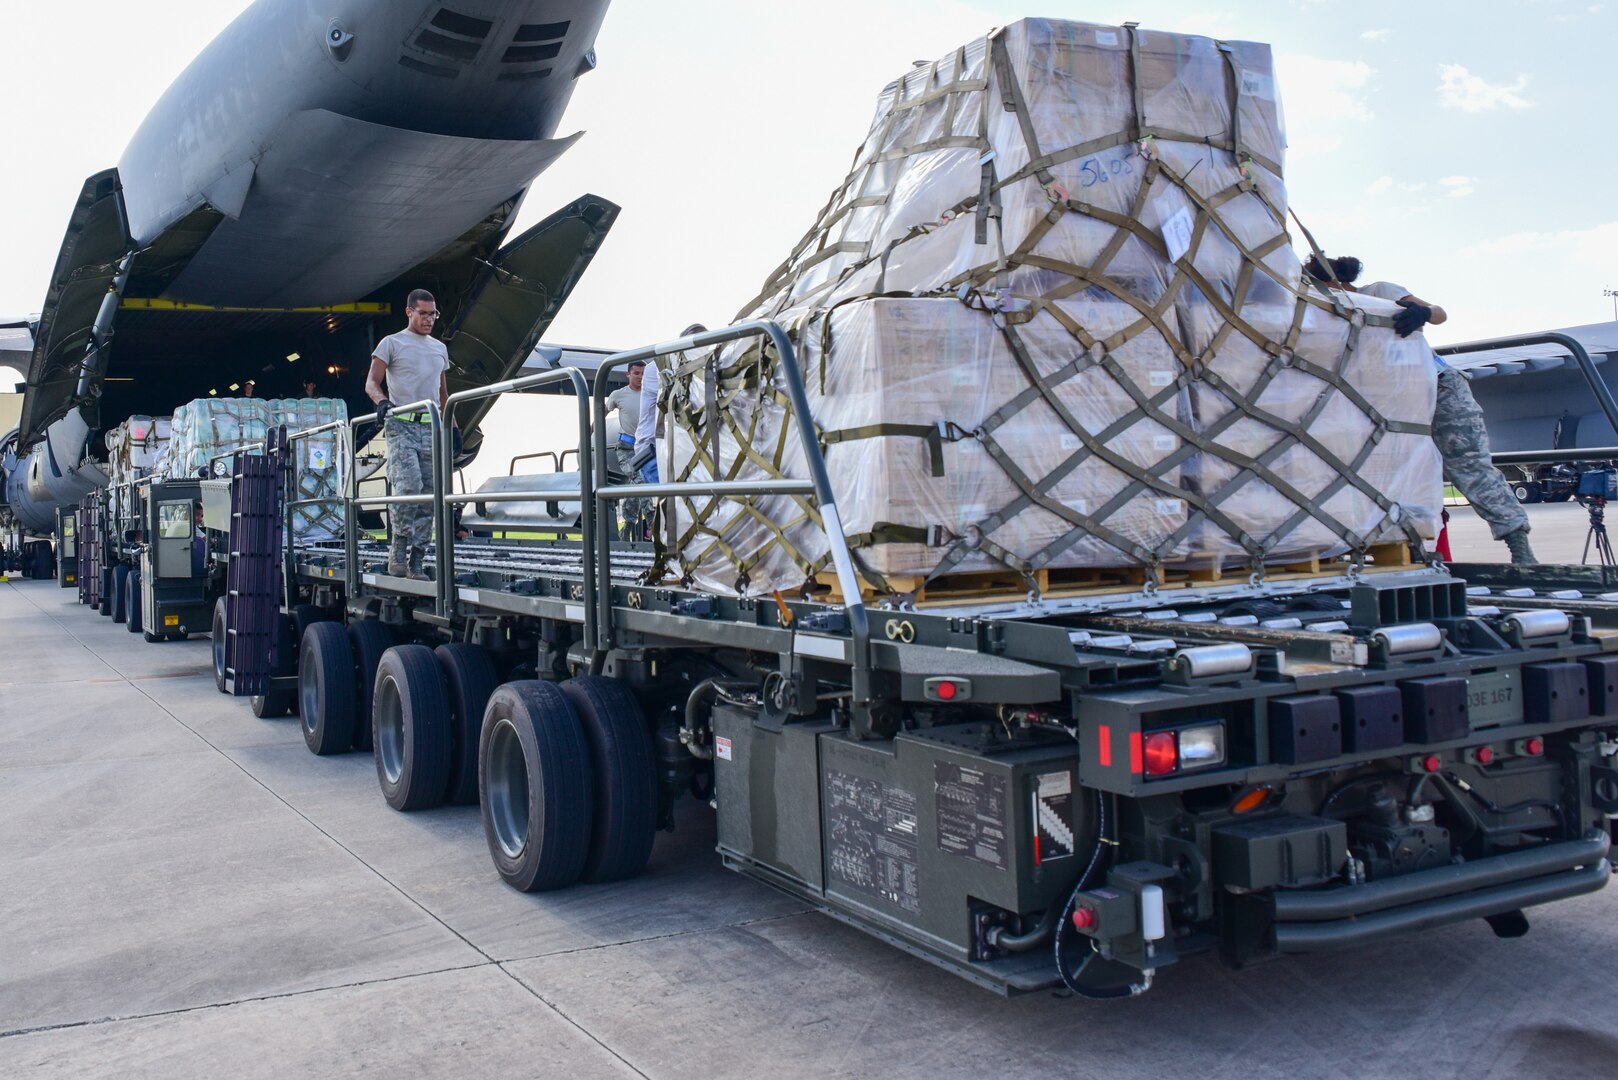 Members from the 502nd Logistics Readiness Squadron and the 433rd Airlift Wing load pallets containing medical supplies and equipment